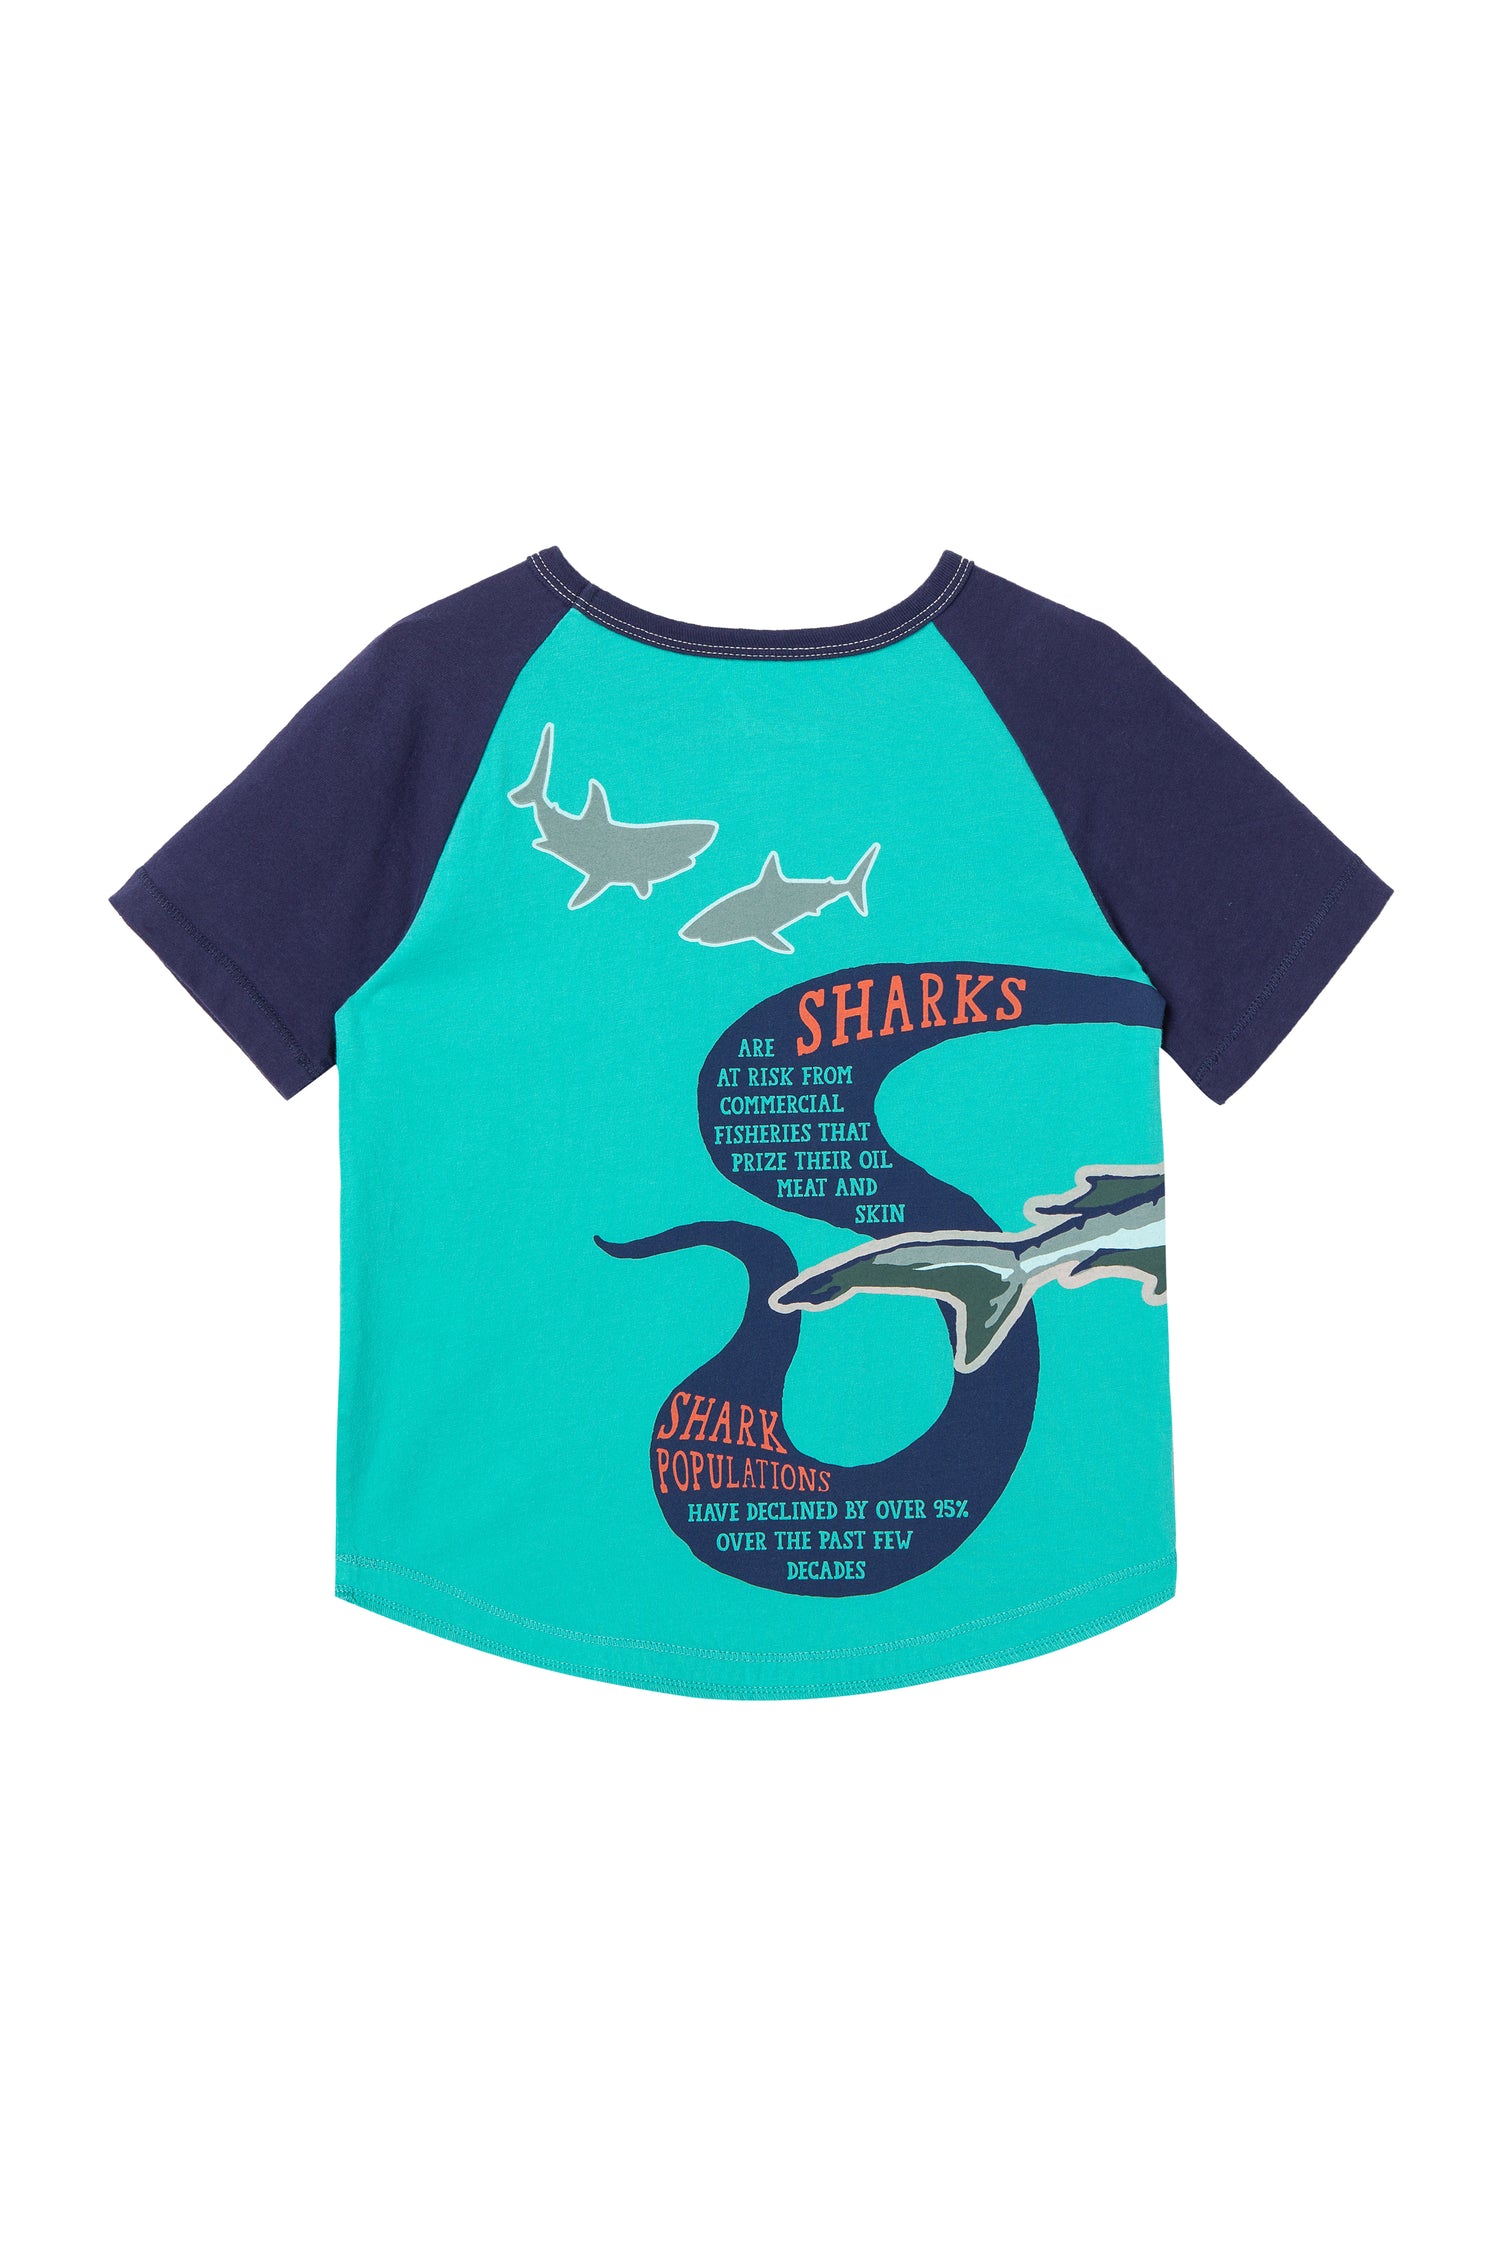 Front view of blue baseball tee style shirt with shark images and wording 